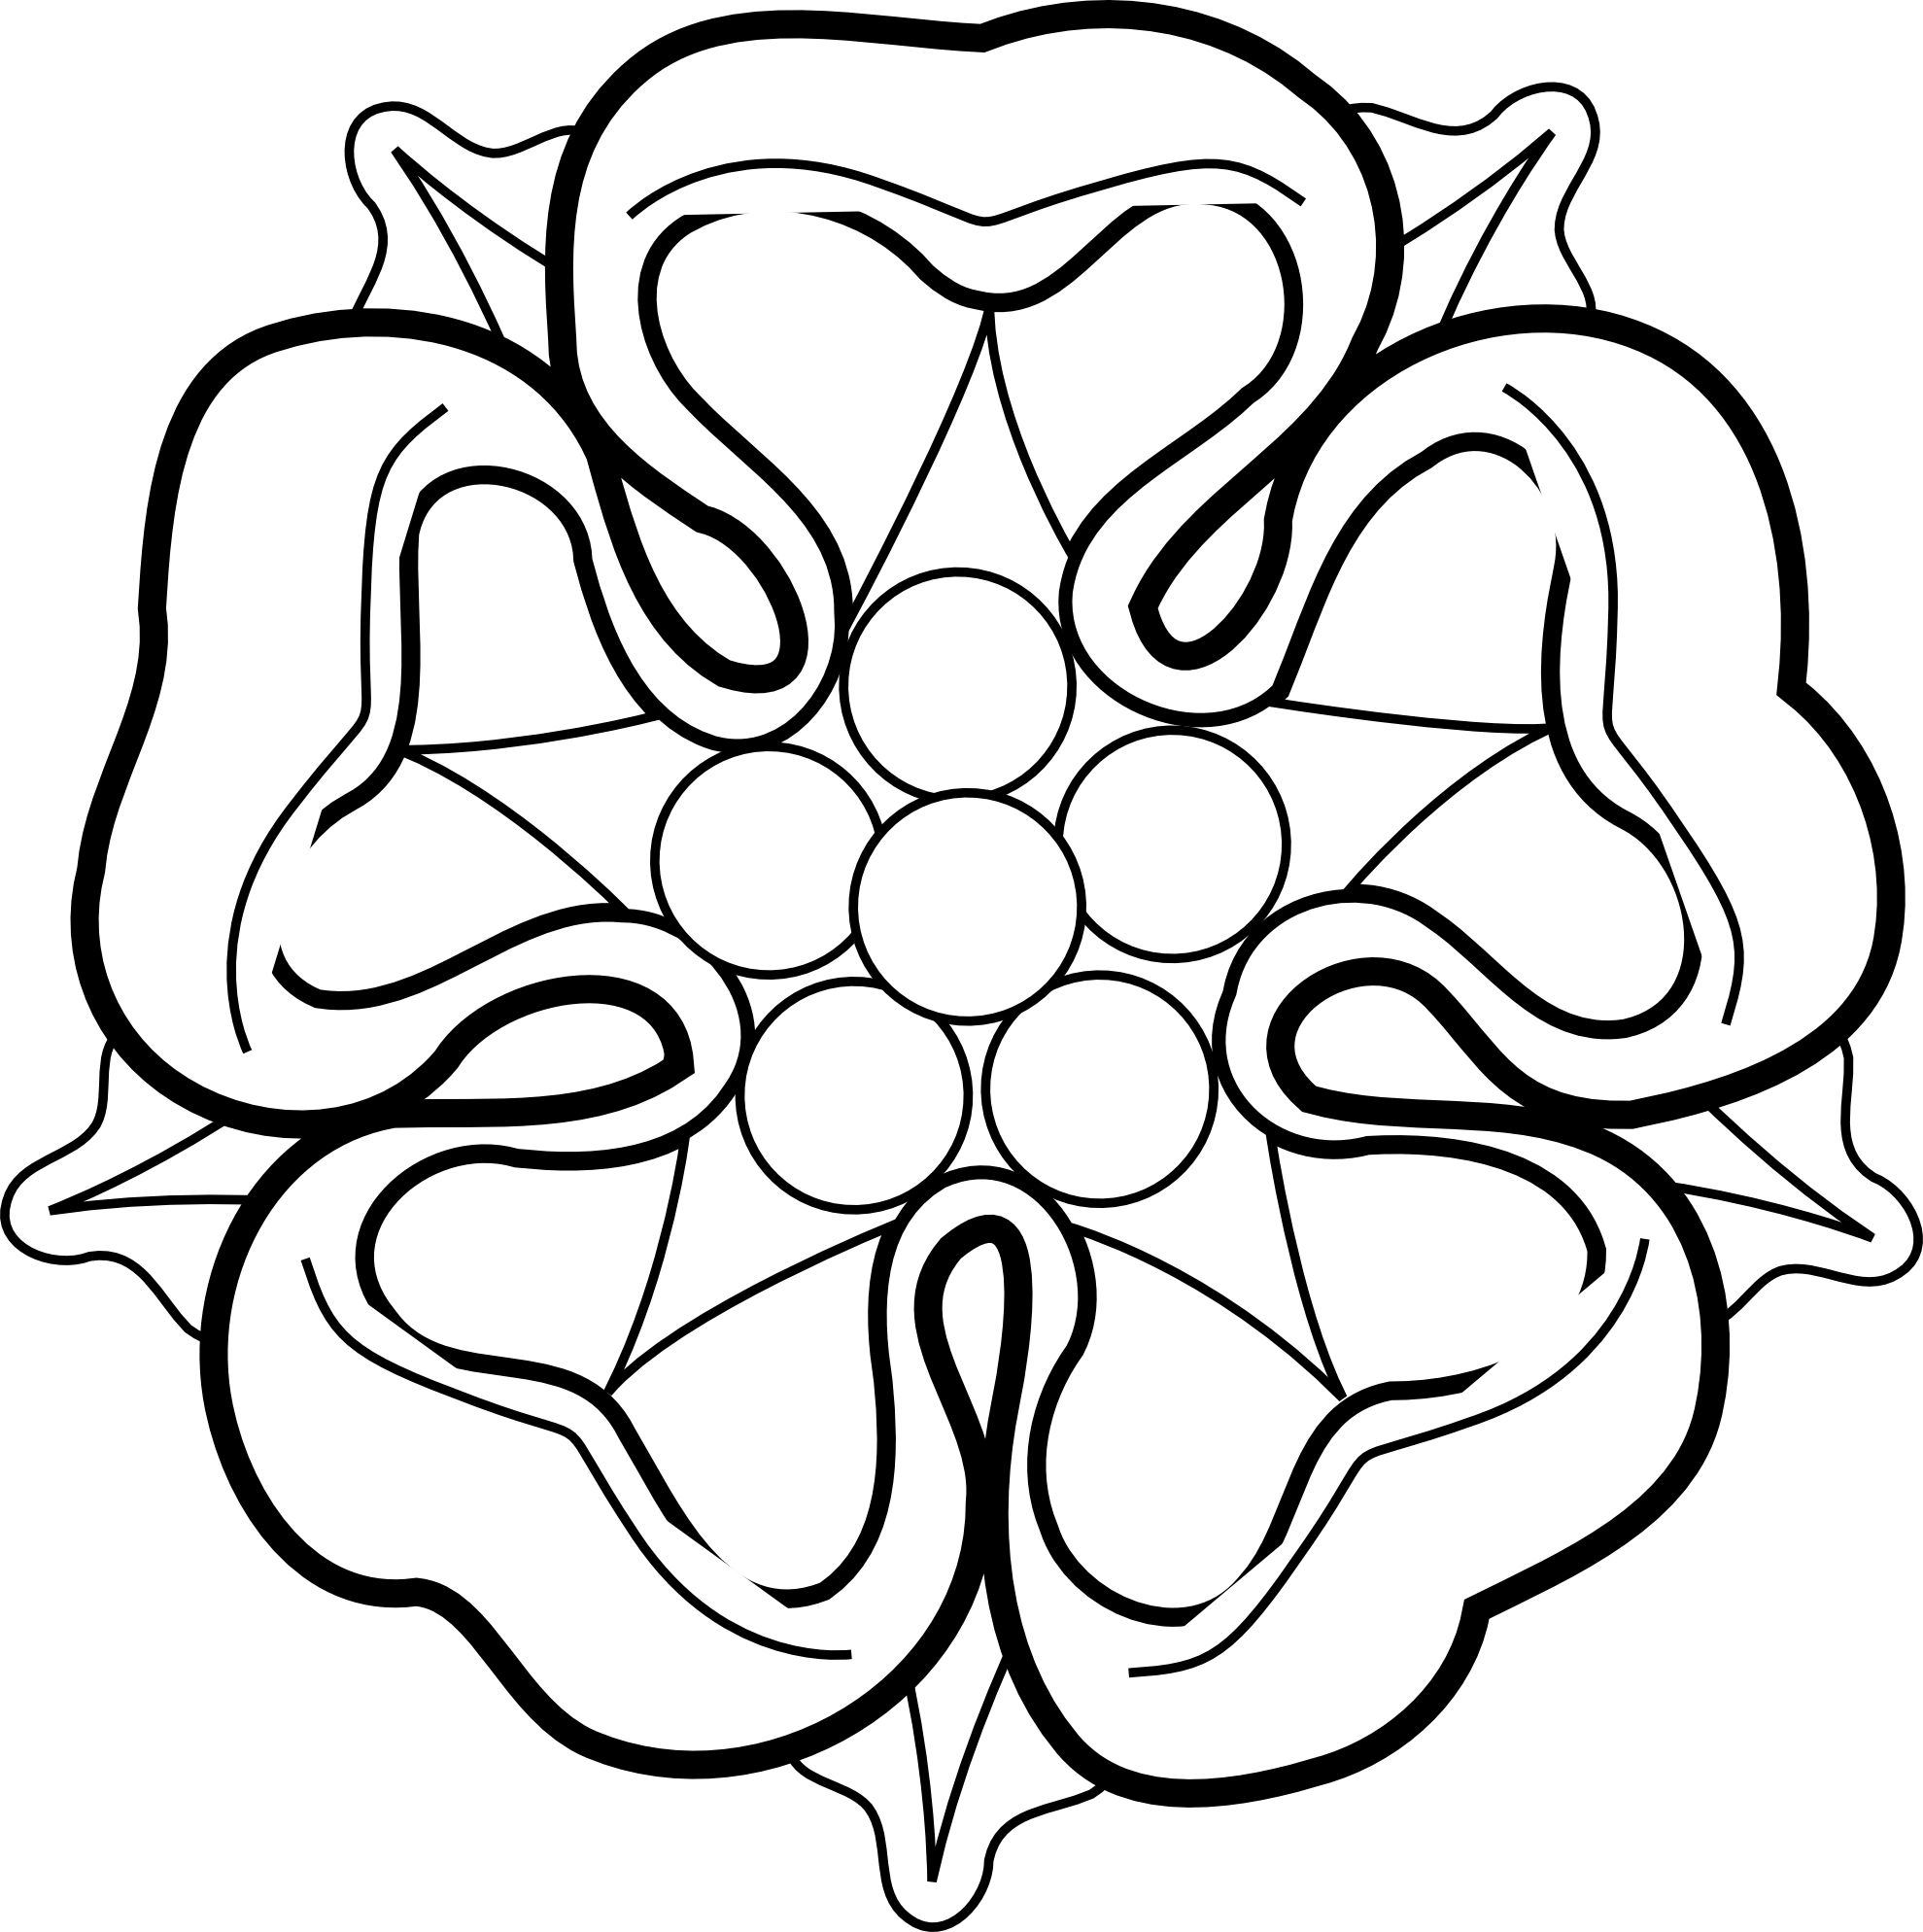 clipart yorkshire rose - photo #21